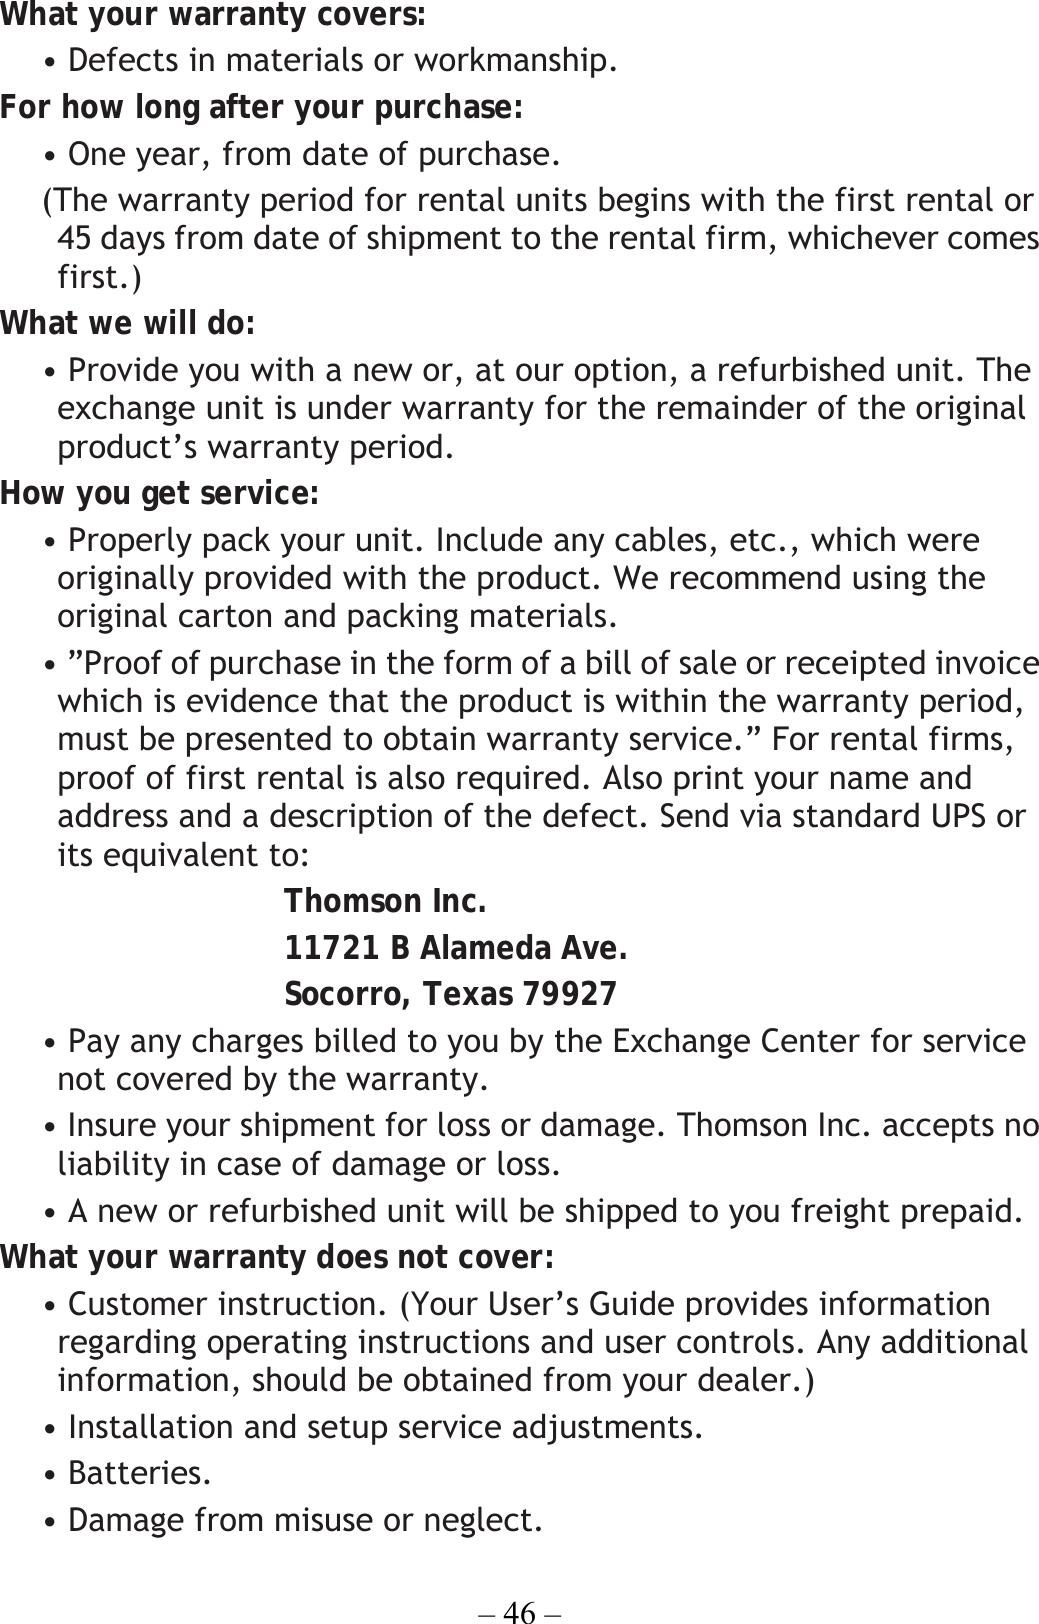 – 46 – What your warranty covers: • Defects in materials or workmanship. For how long after your purchase: • One year, from date of purchase.   (The warranty period for rental units begins with the first rental or 45 days from date of shipment to the rental firm, whichever comes first.) What we will do: • Provide you with a new or, at our option, a refurbished unit. The exchange unit is under warranty for the remainder of the original product’s warranty period. How you get service: • Properly pack your unit. Include any cables, etc., which were originally provided with the product. We recommend using the original carton and packing materials. • ”Proof of purchase in the form of a bill of sale or receipted invoice which is evidence that the product is within the warranty period, must be presented to obtain warranty service.” For rental firms, proof of first rental is also required. Also print your name and address and a description of the defect. Send via standard UPS or its equivalent to: Thomson Inc. 11721 B Alameda Ave. Socorro, Texas 79927 • Pay any charges billed to you by the Exchange Center for service not covered by the warranty. • Insure your shipment for loss or damage. Thomson Inc. accepts no liability in case of damage or loss. • A new or refurbished unit will be shipped to you freight prepaid. What your warranty does not cover: • Customer instruction. (Your User’s Guide provides information regarding operating instructions and user controls. Any additional information, should be obtained from your dealer.) • Installation and setup service adjustments. • Batteries. • Damage from misuse or neglect. 